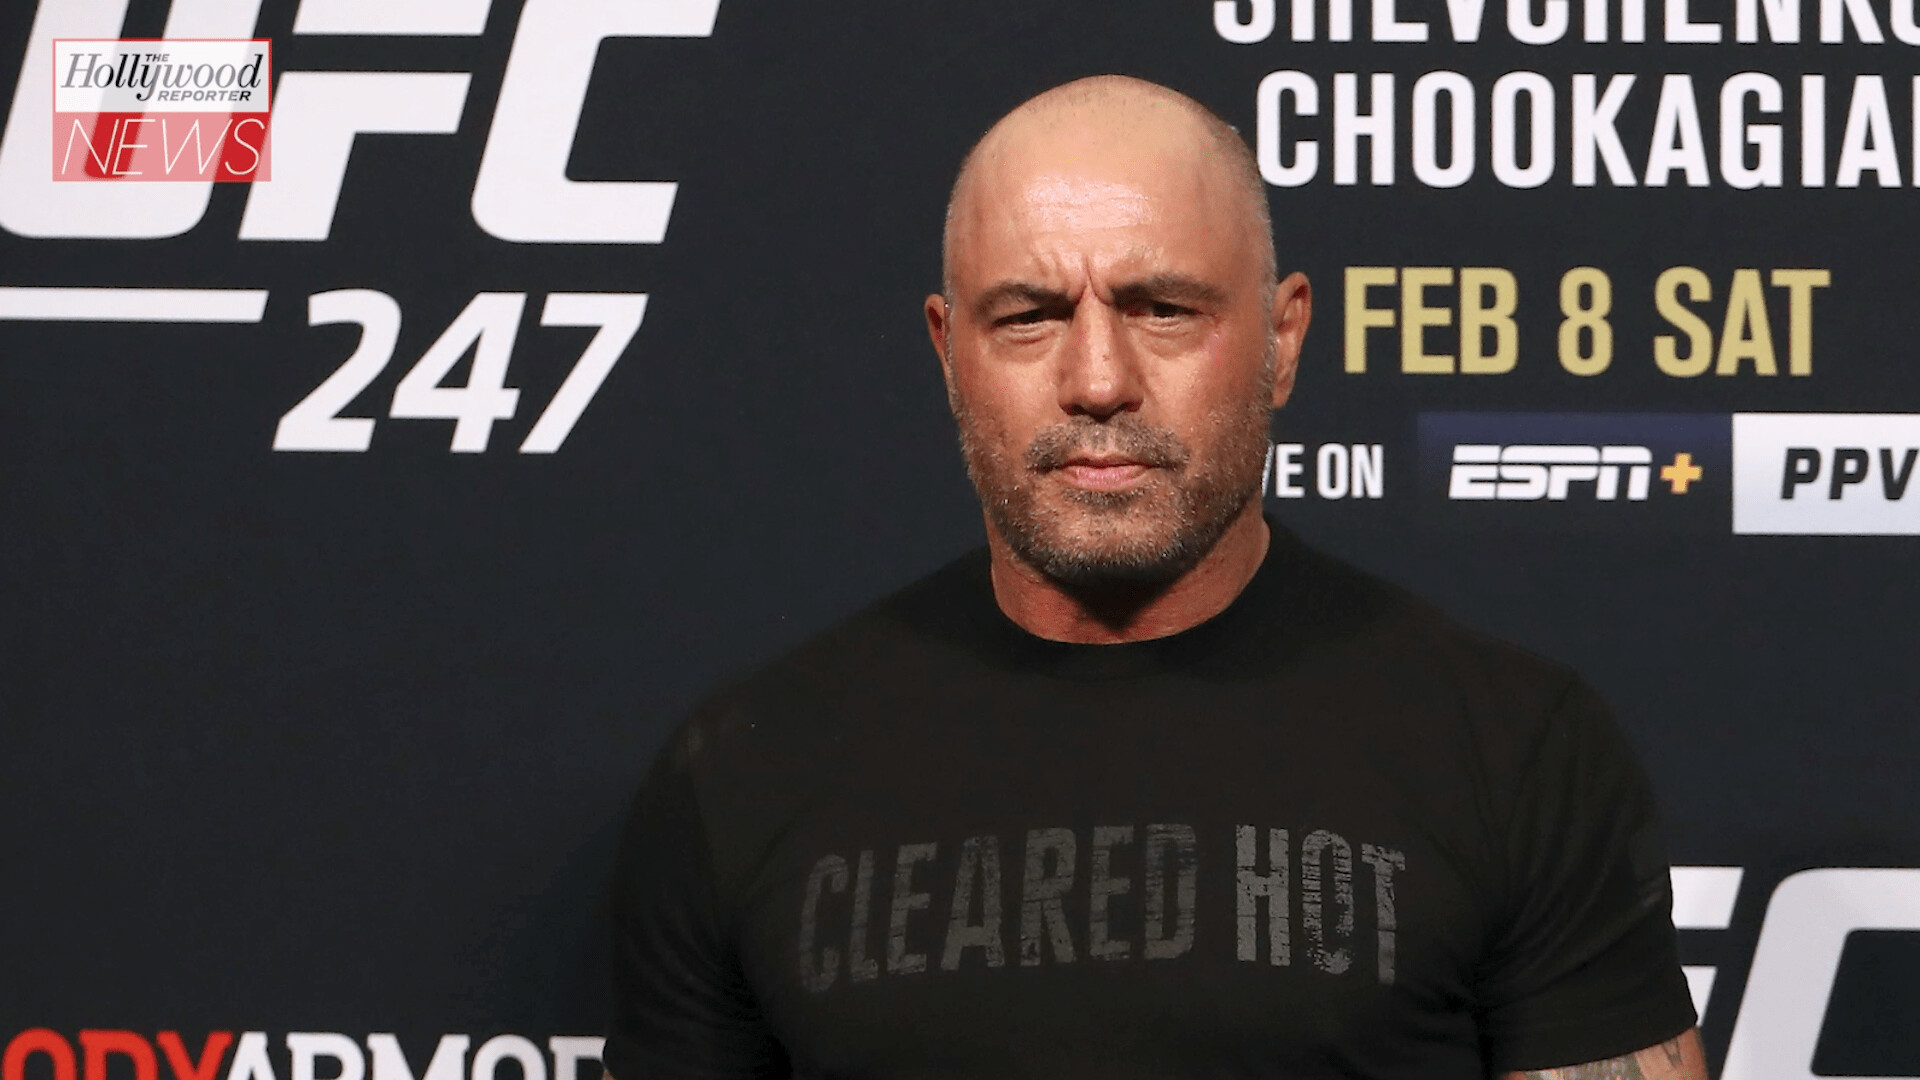 Joe Rogan: Began working for the mixed martial arts promotion Ultimate Fighting Championship in 1997. 1920x1080 Full HD Wallpaper.